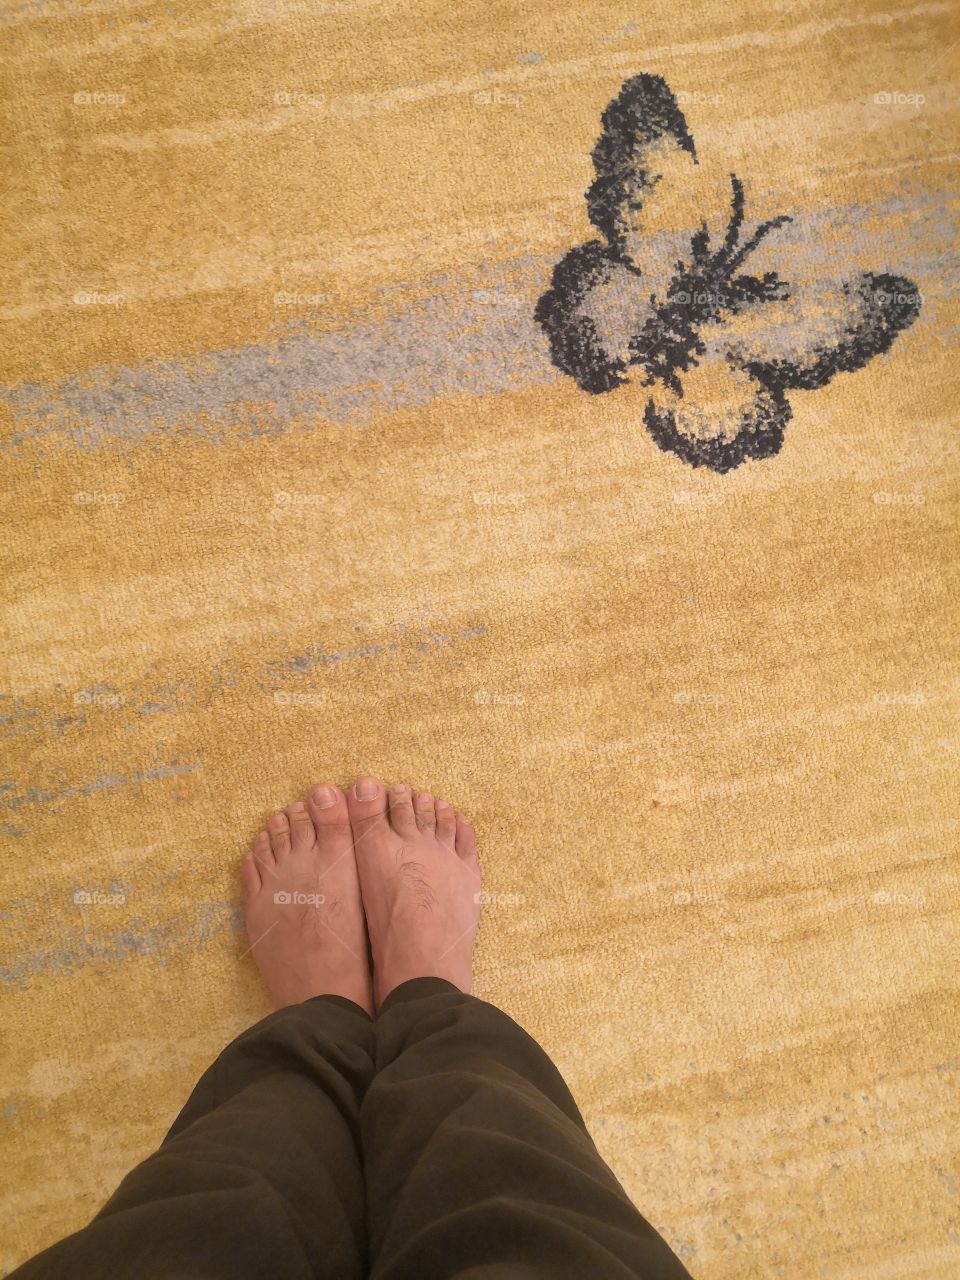 Foot and Butterfly